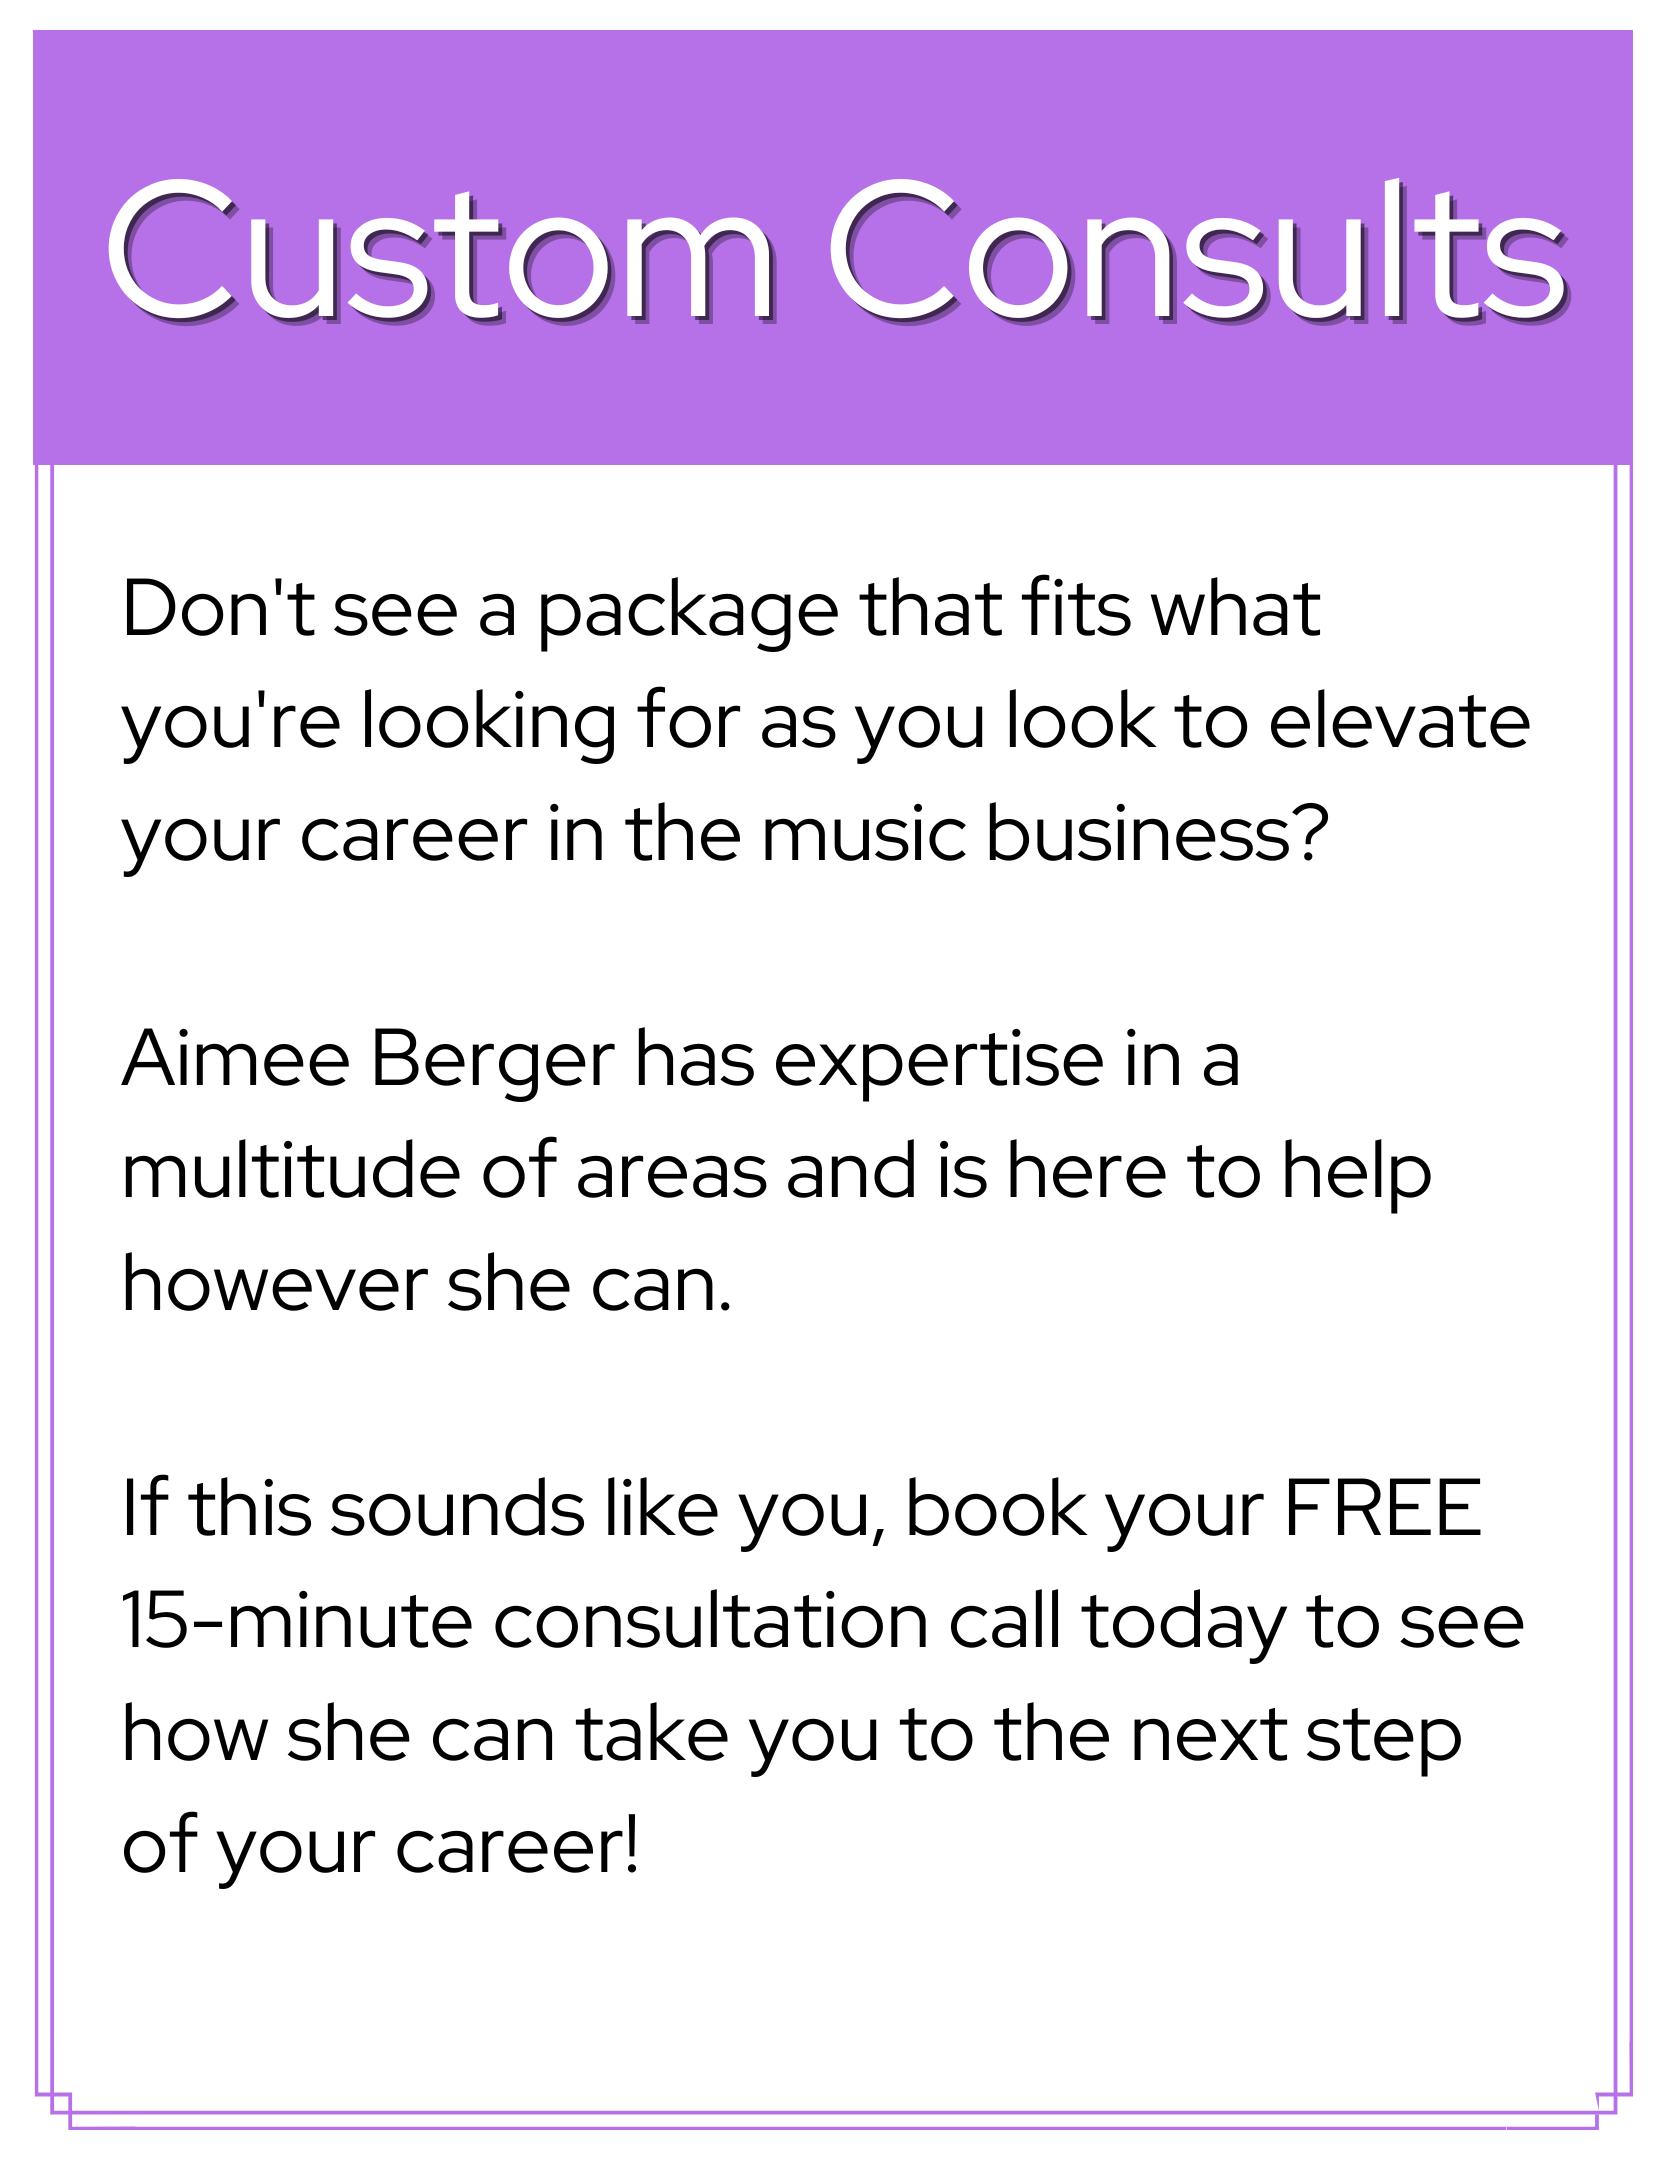 Custom Consultations with Aimee Berger | Music Business Coaching